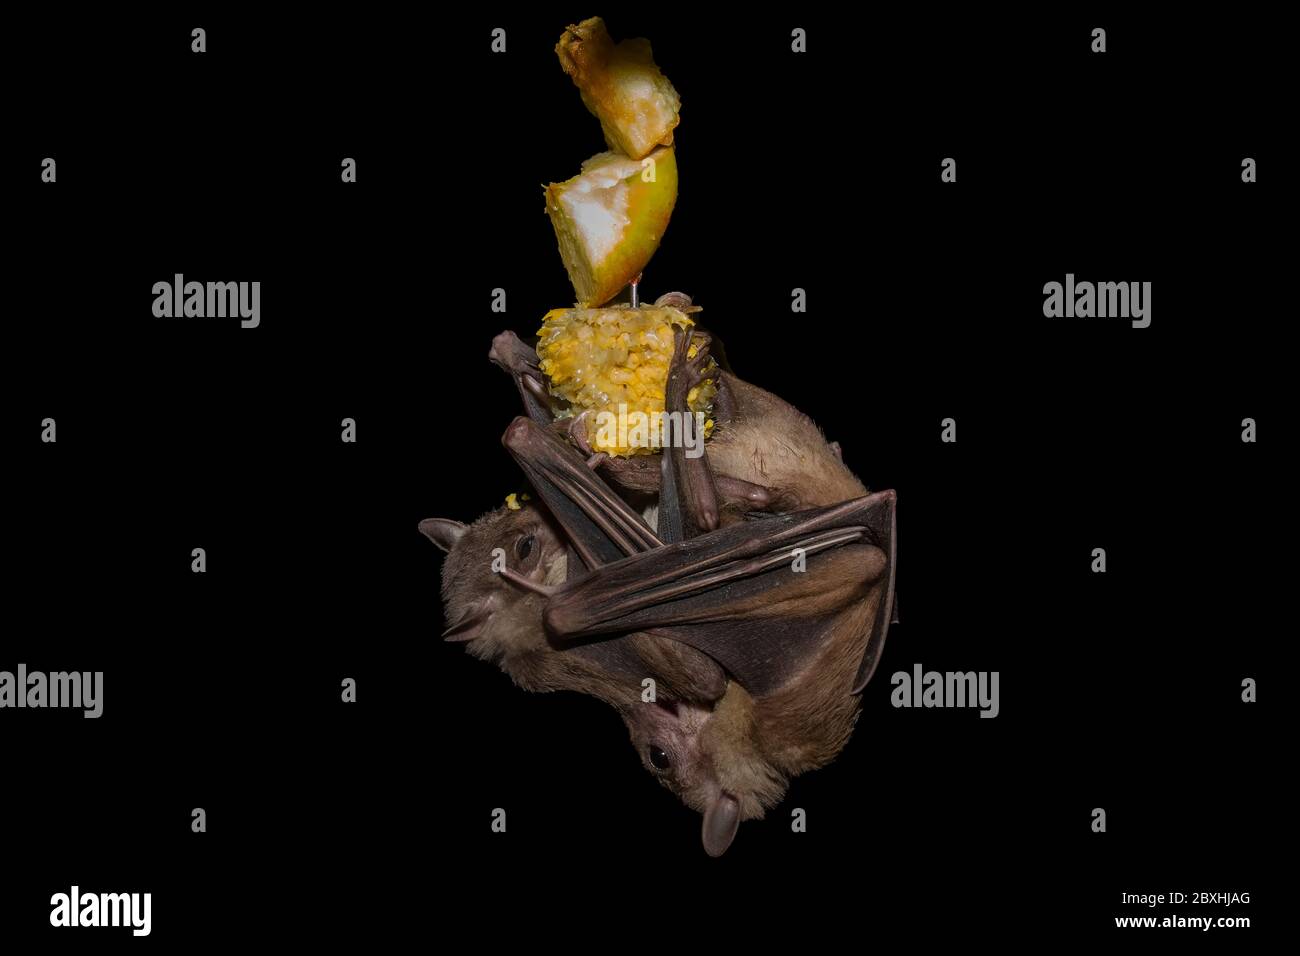 Fruit Bats in flight and Eating Stock Photo